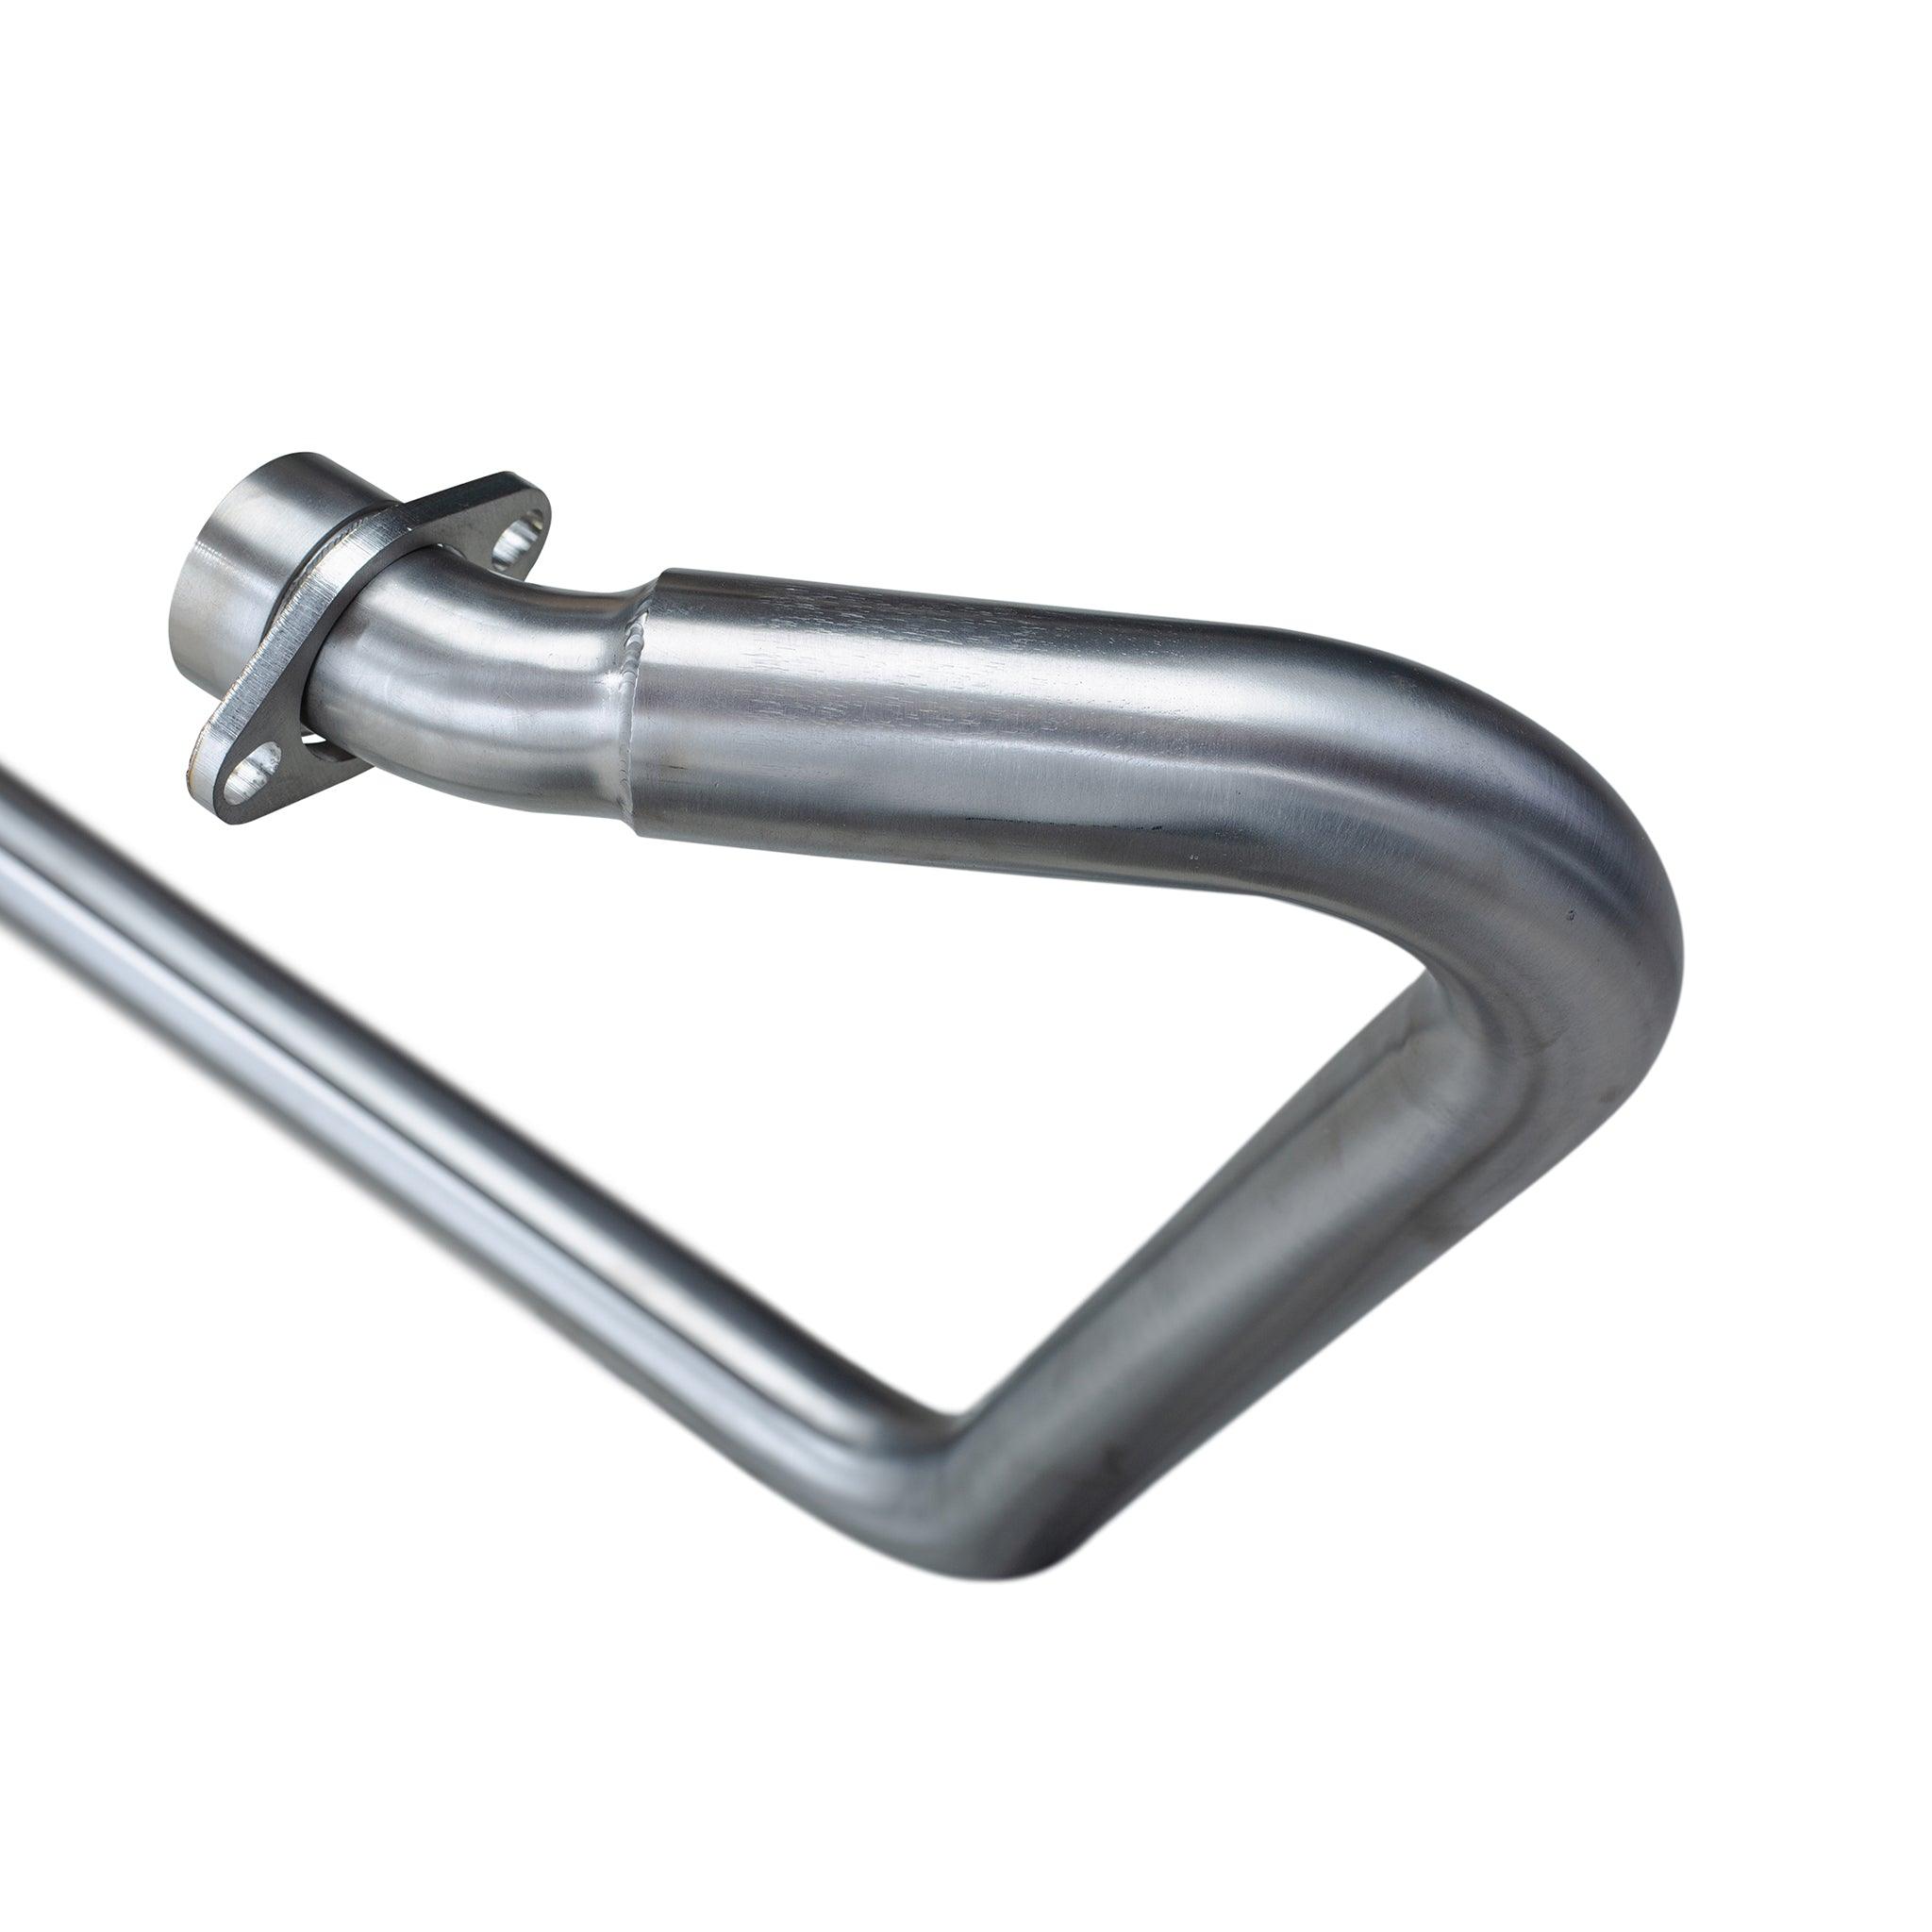 2-2 Drag Pipe Exhaust for Triumph Motorcycles - British Customs